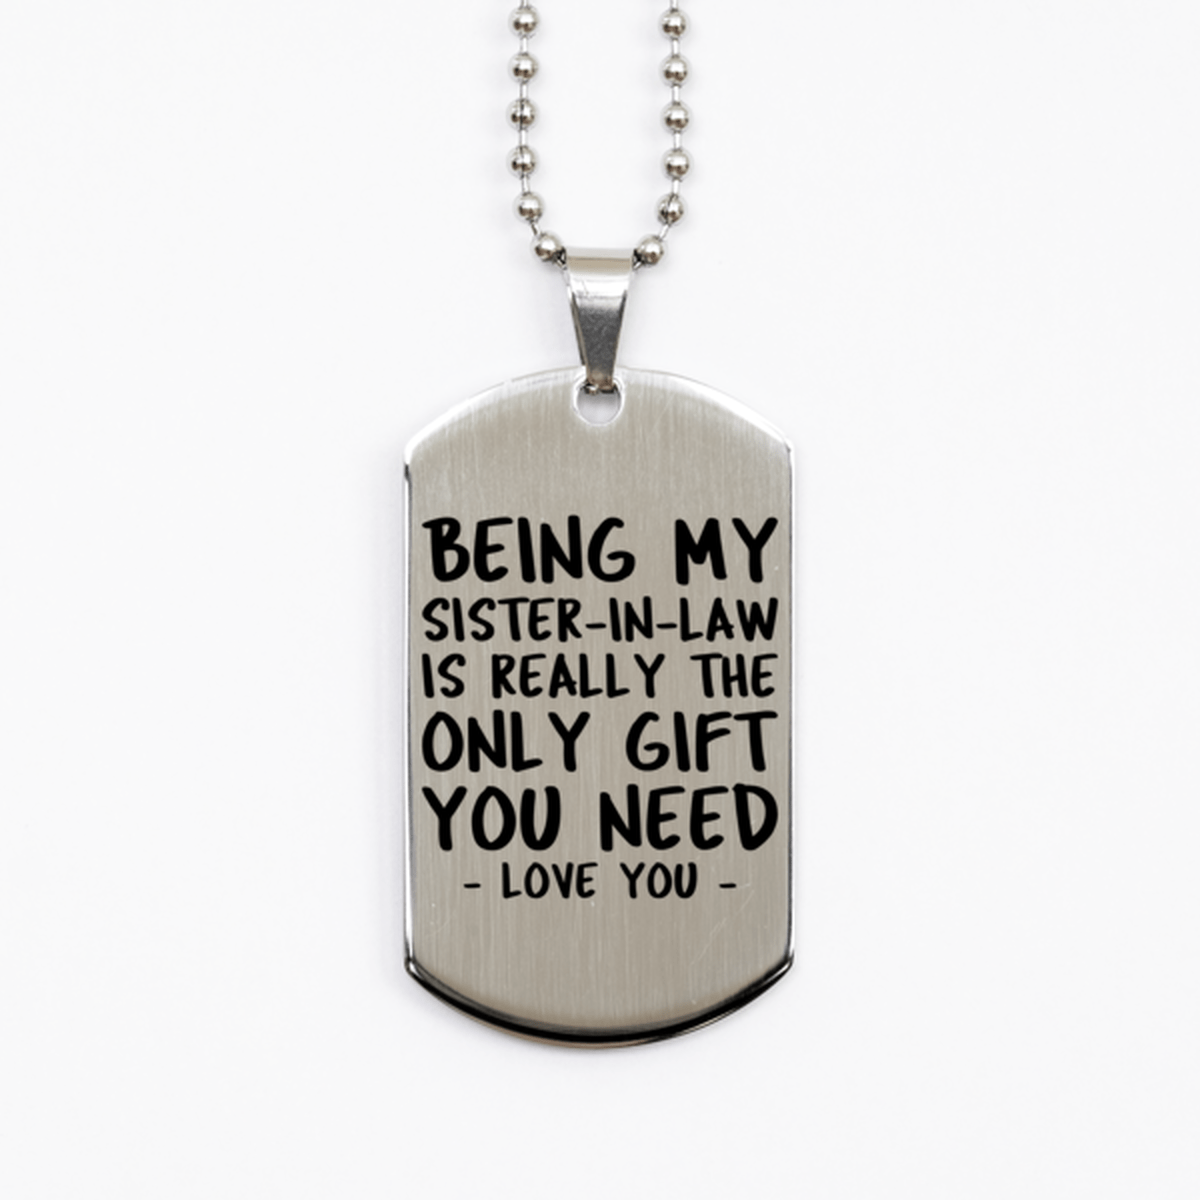 Funny Sister-in-law Silver Dog Tag Necklace, Being My Sister-in-law Is Really the Only Gift You Need, Best Birthday Gifts for Sister-in-law